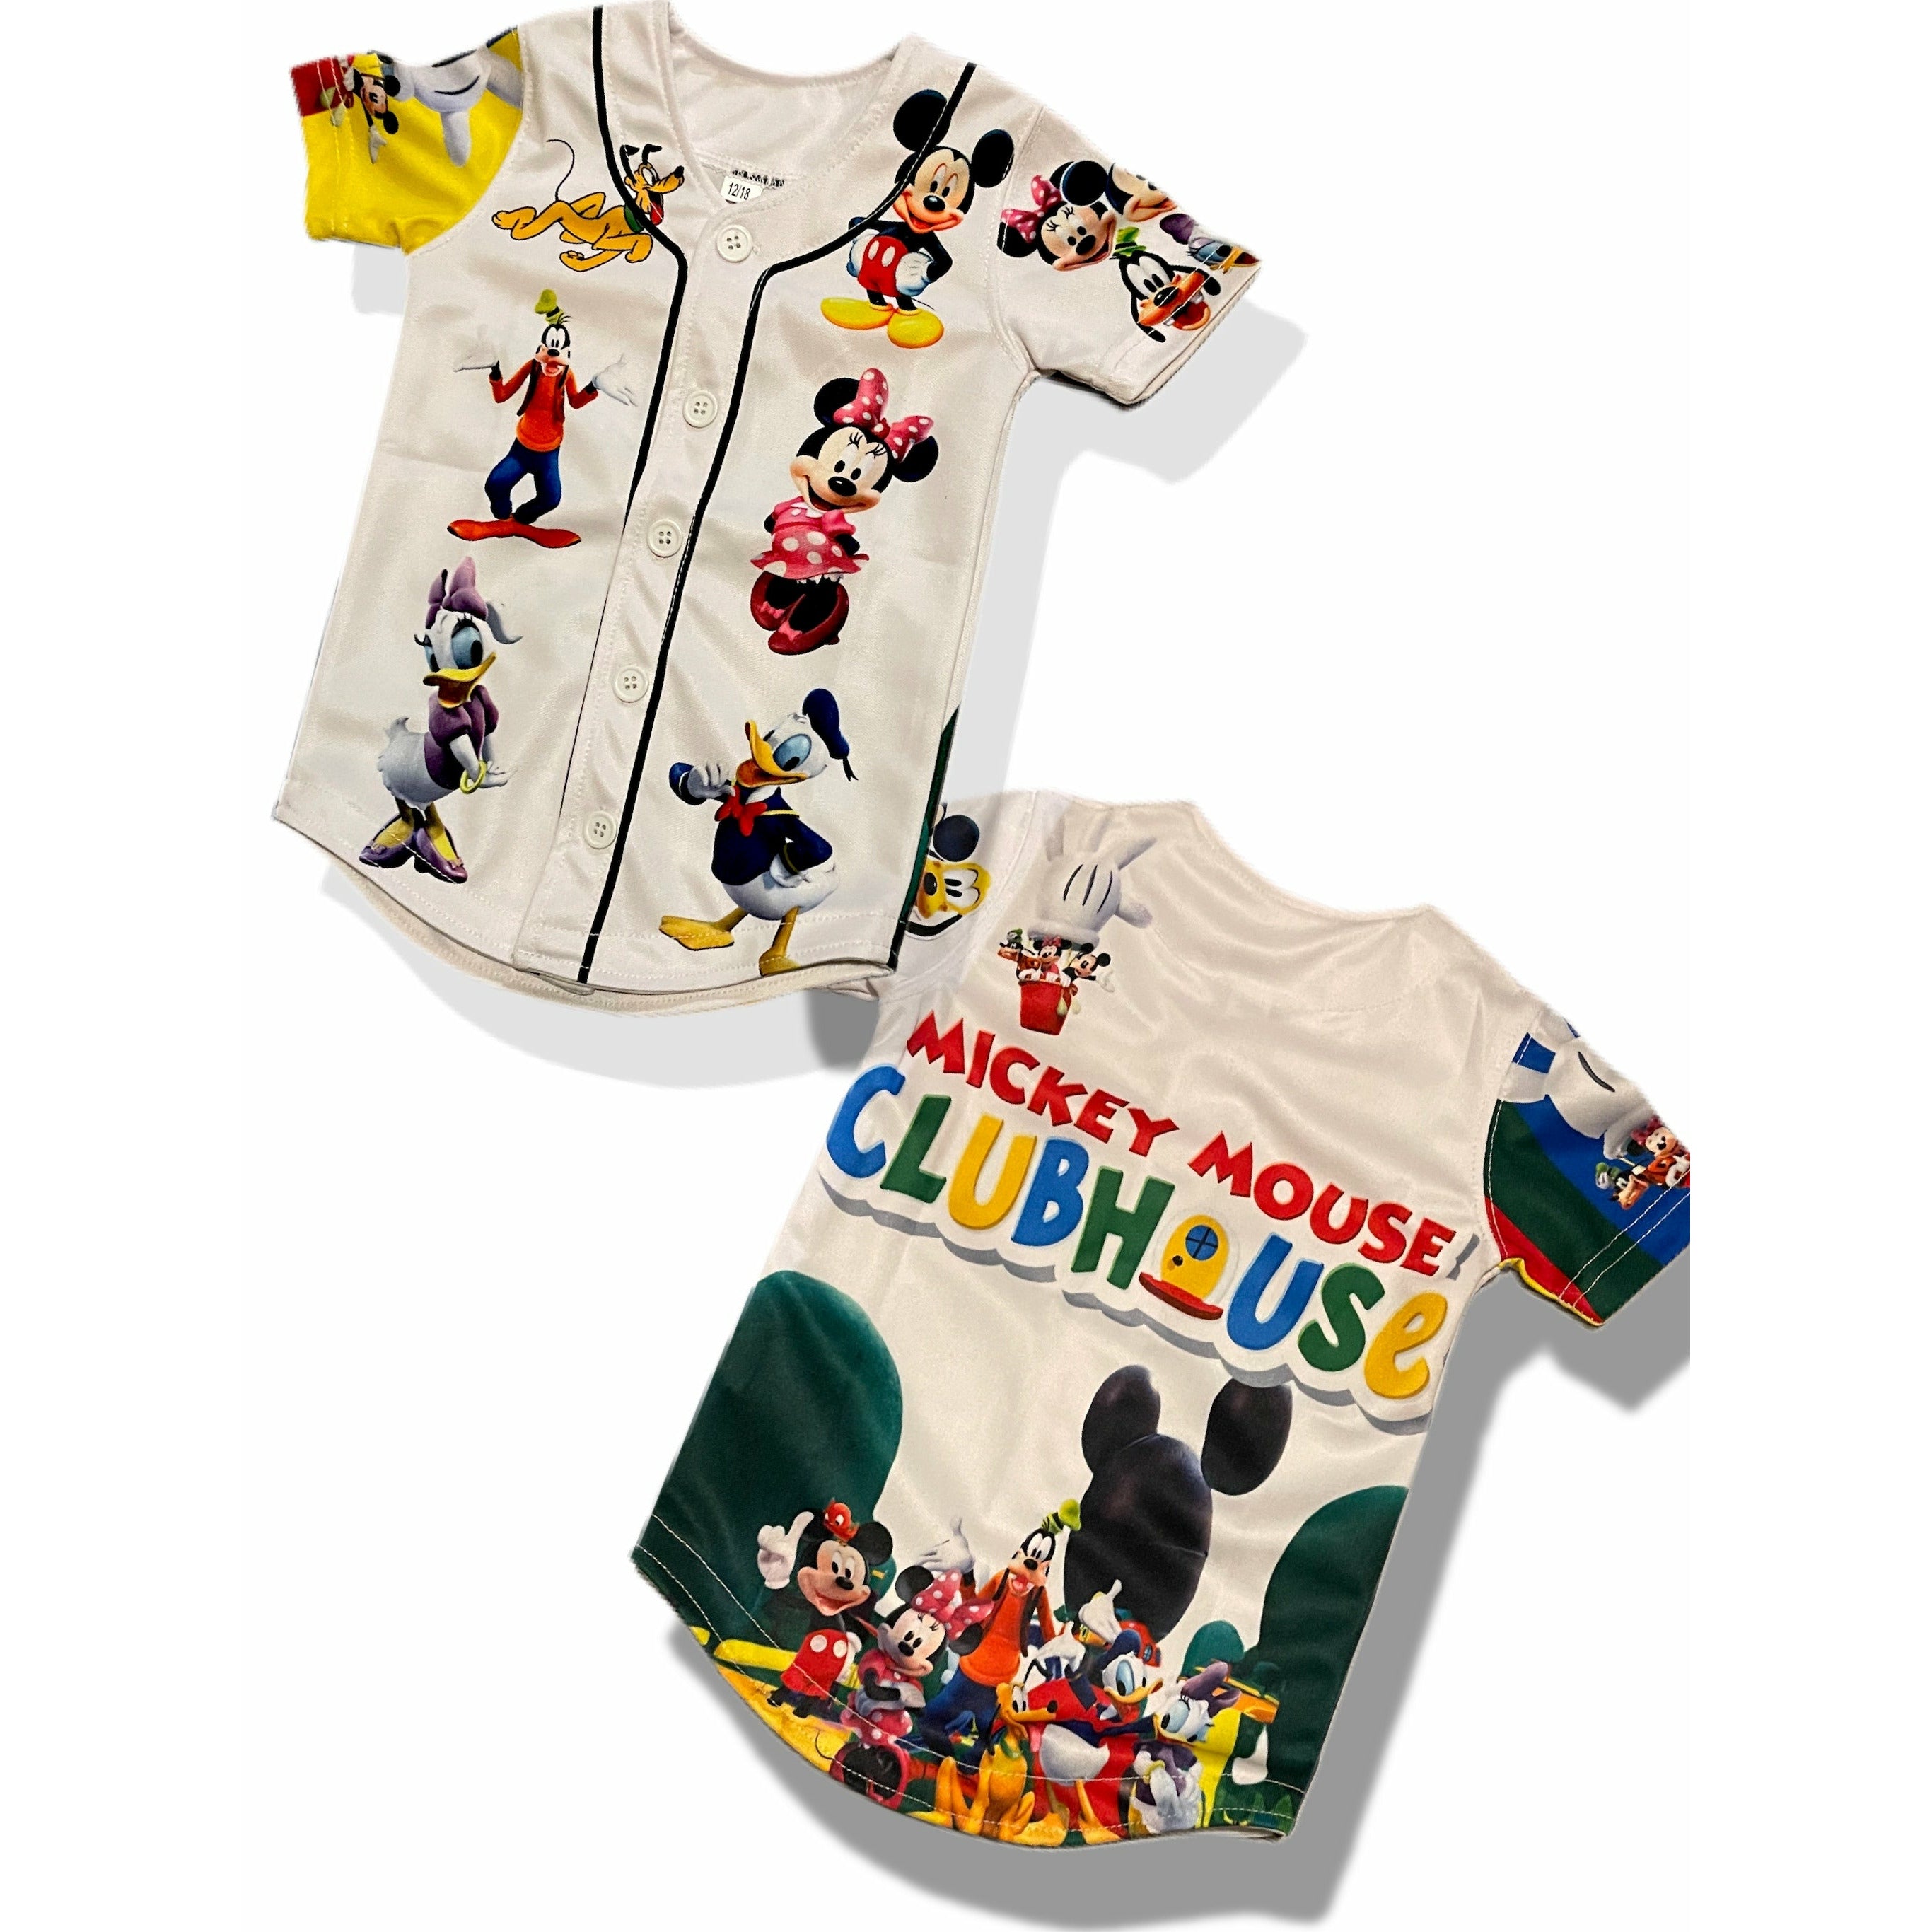 Men's Mickey Clubhouse baseball jersey